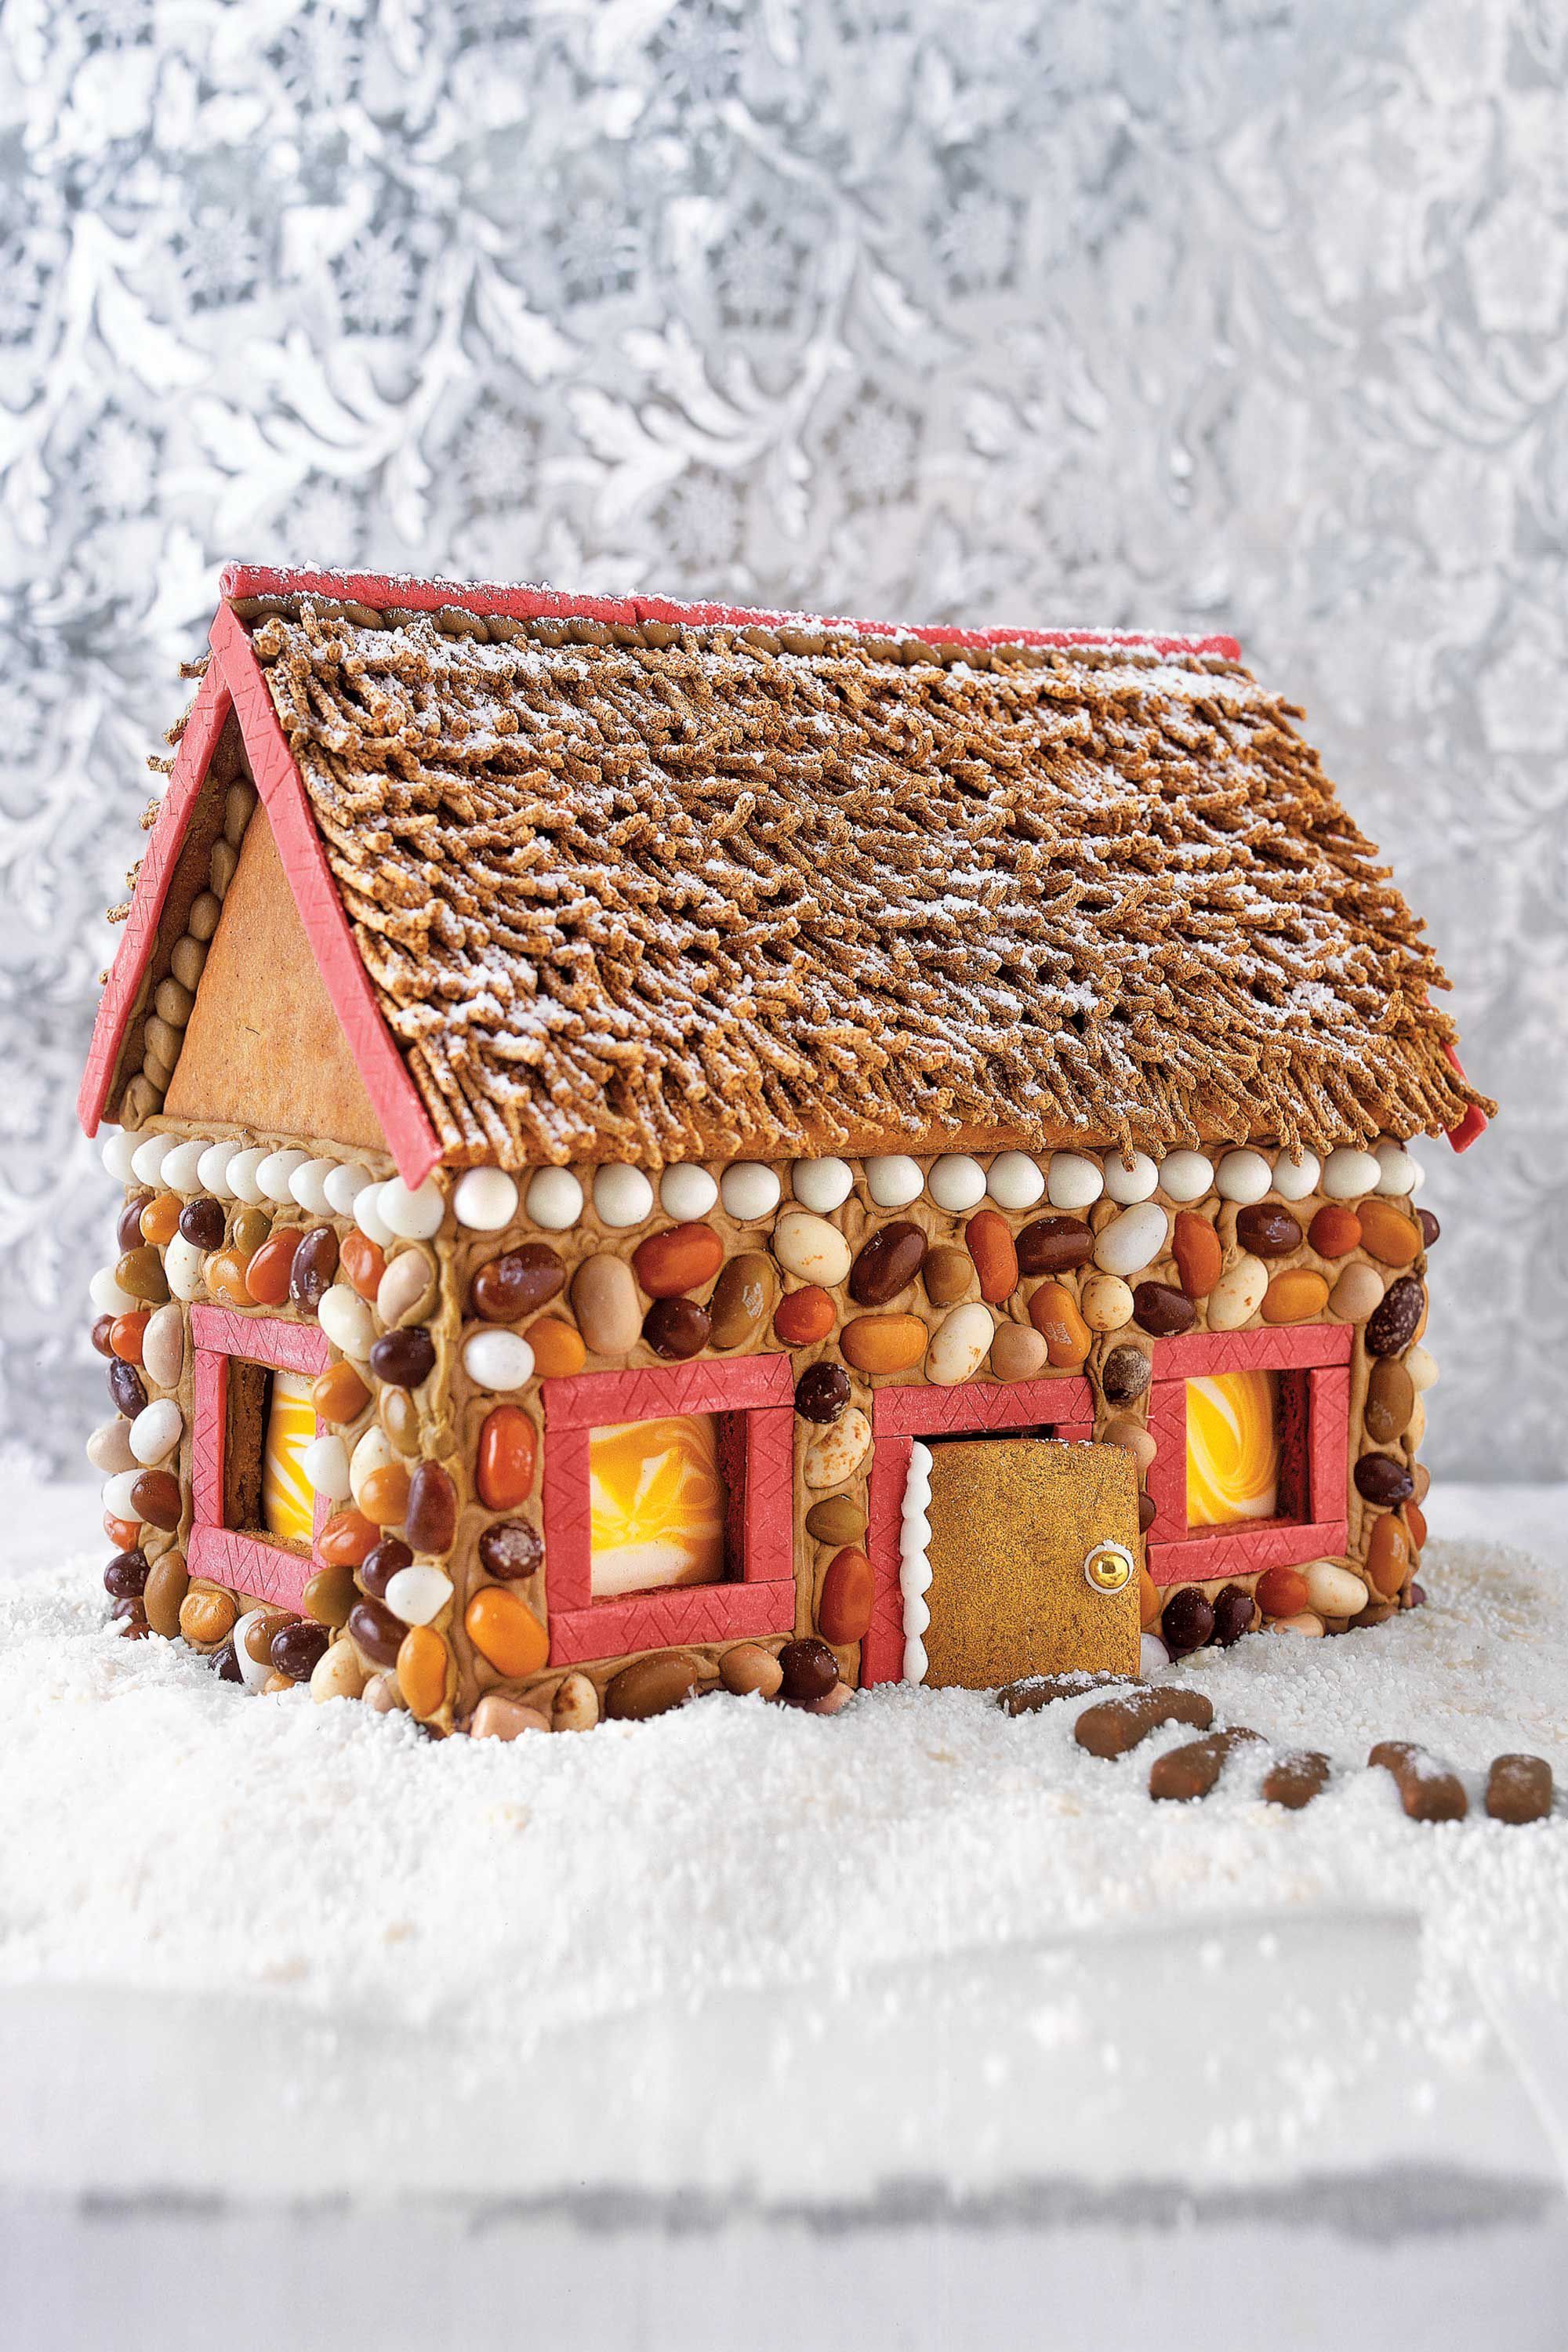 Gingerbread Stone Cottage -   Cristmass Gingerbread and Pretzel Houses Ideas